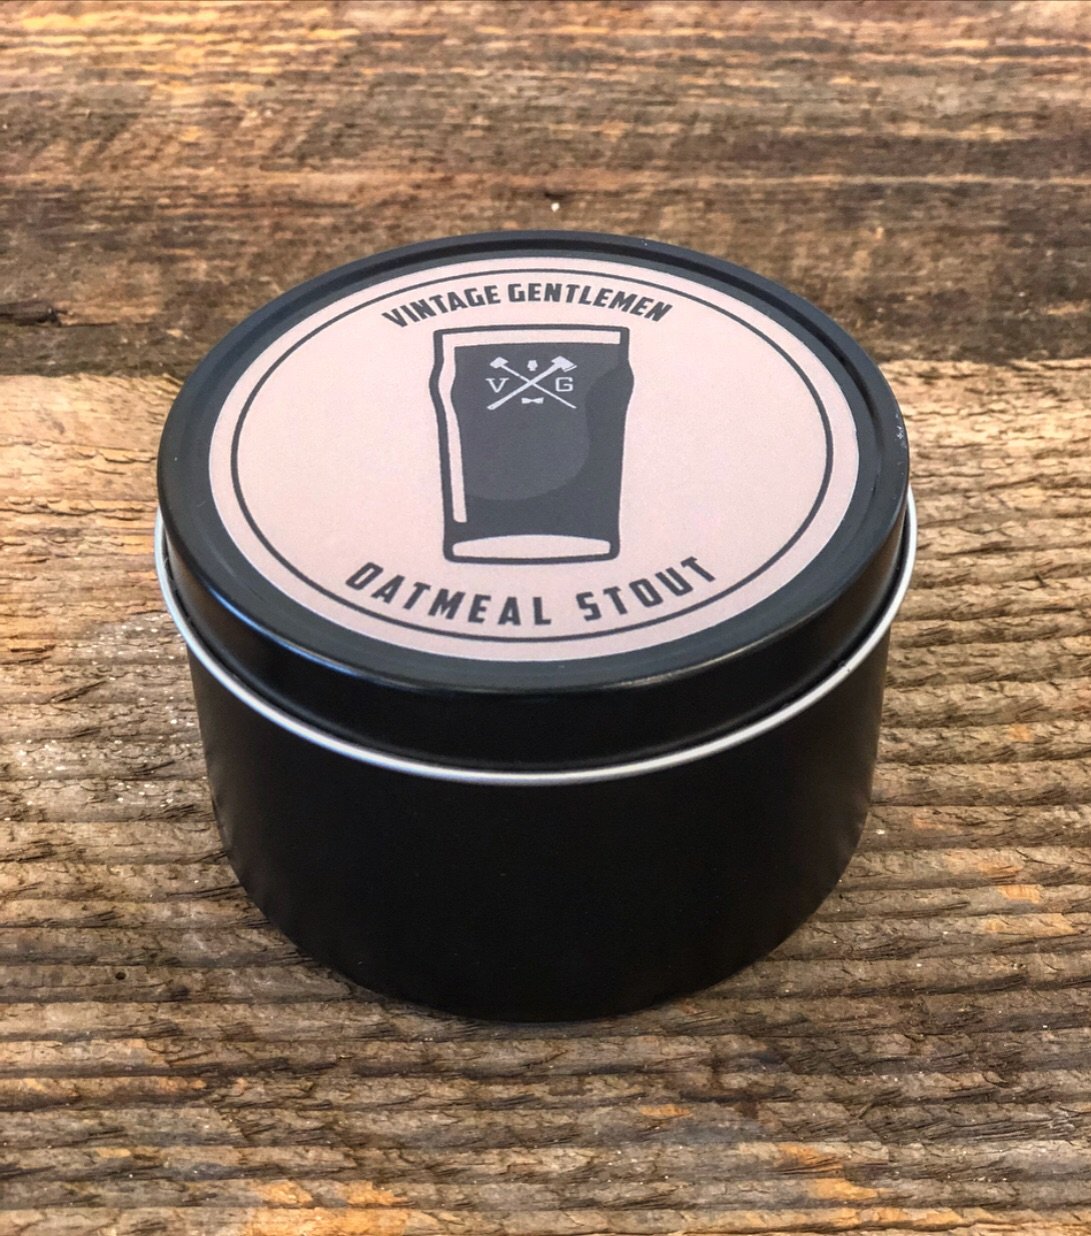 “Oatmeal Stout” Soy Candle by Vintage Gentlemen